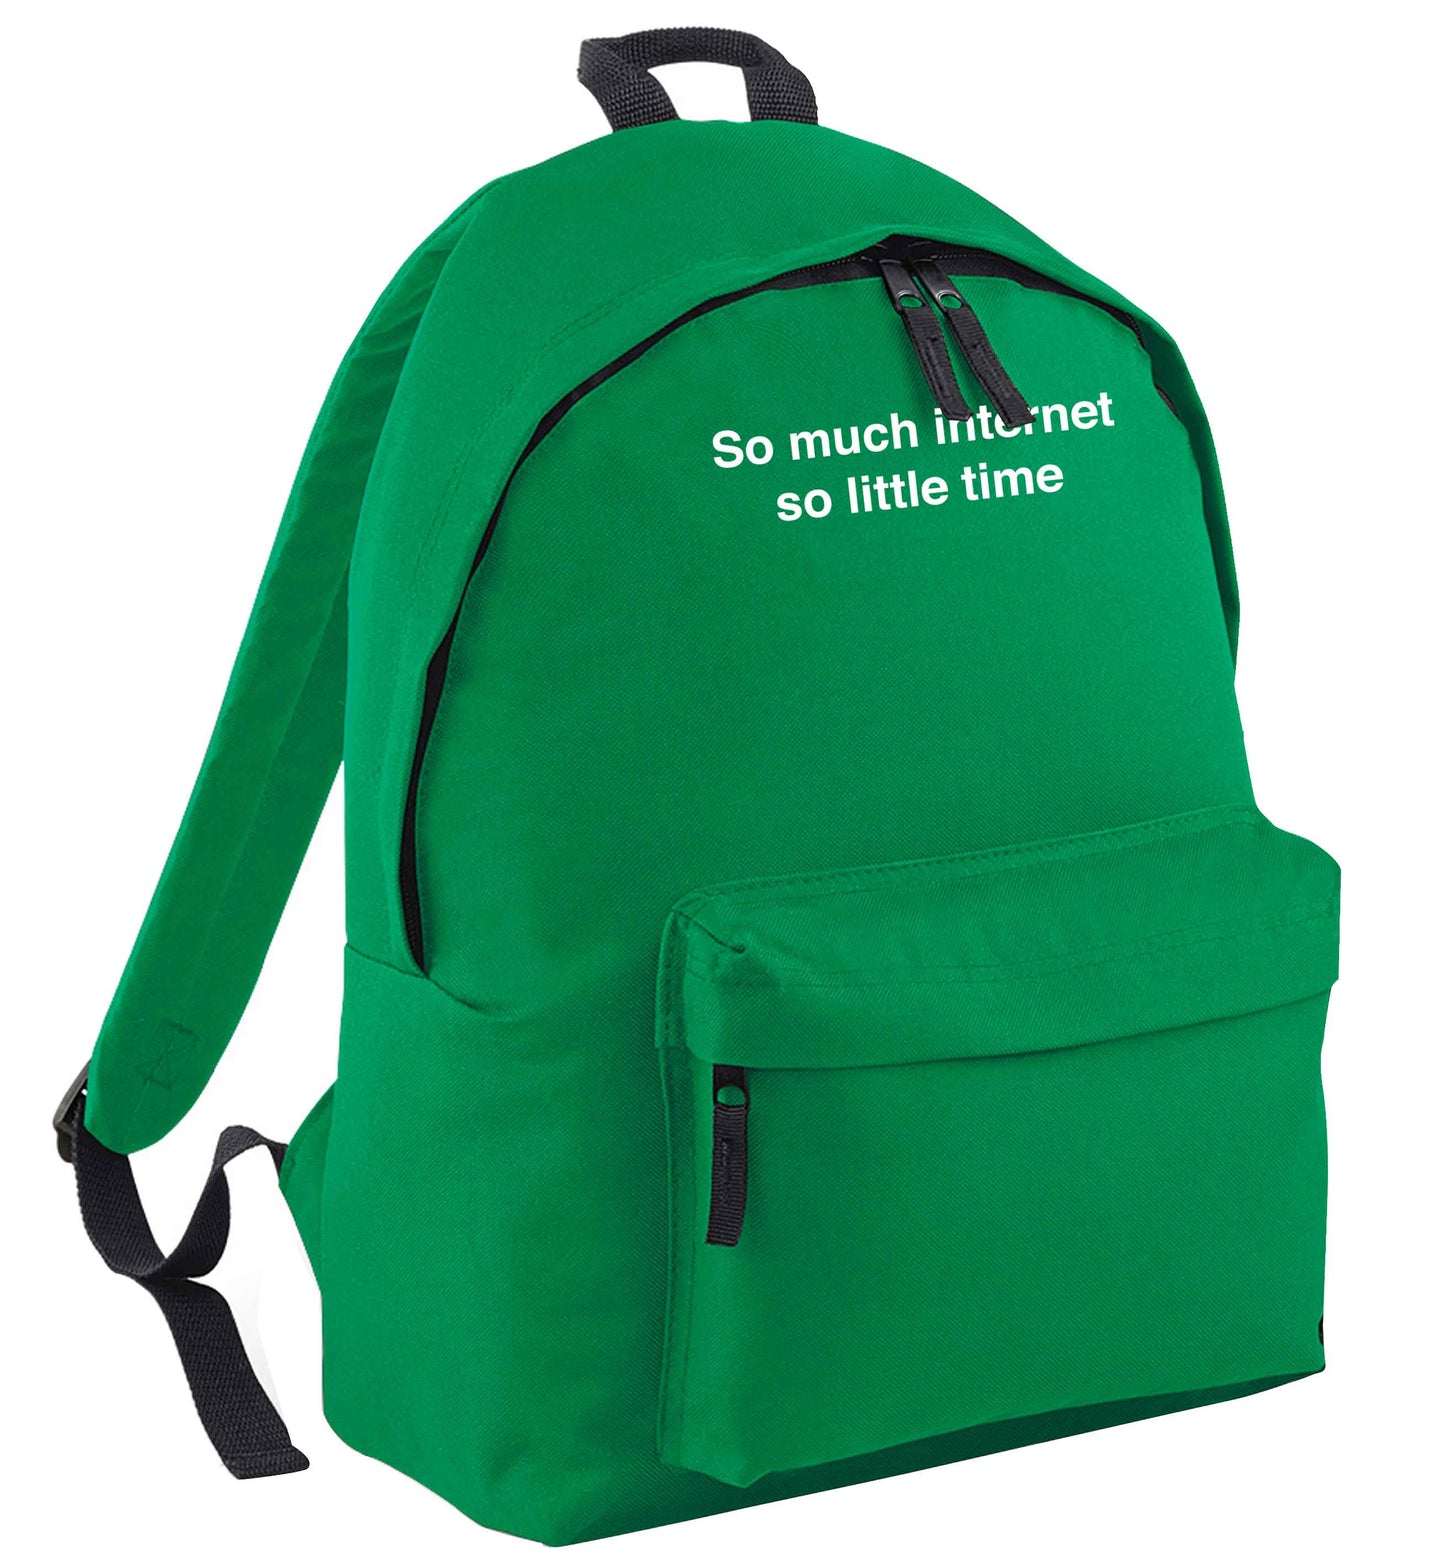 So much internet so little time green adults backpack